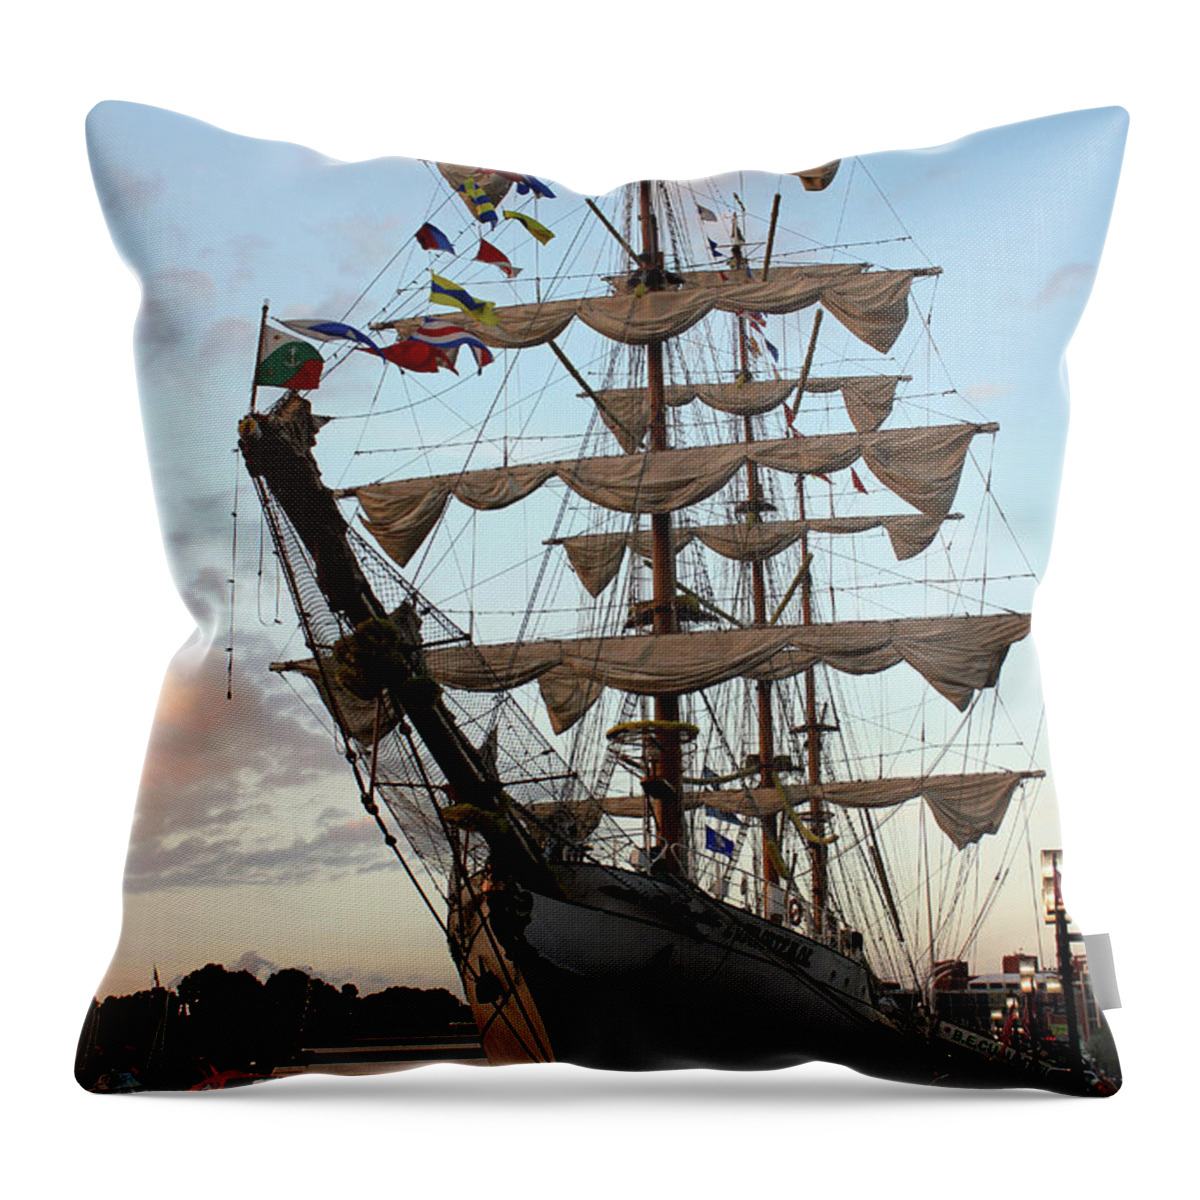 Baltimore Throw Pillow featuring the photograph Tall Ship7646 by Carolyn Stagger Cokley